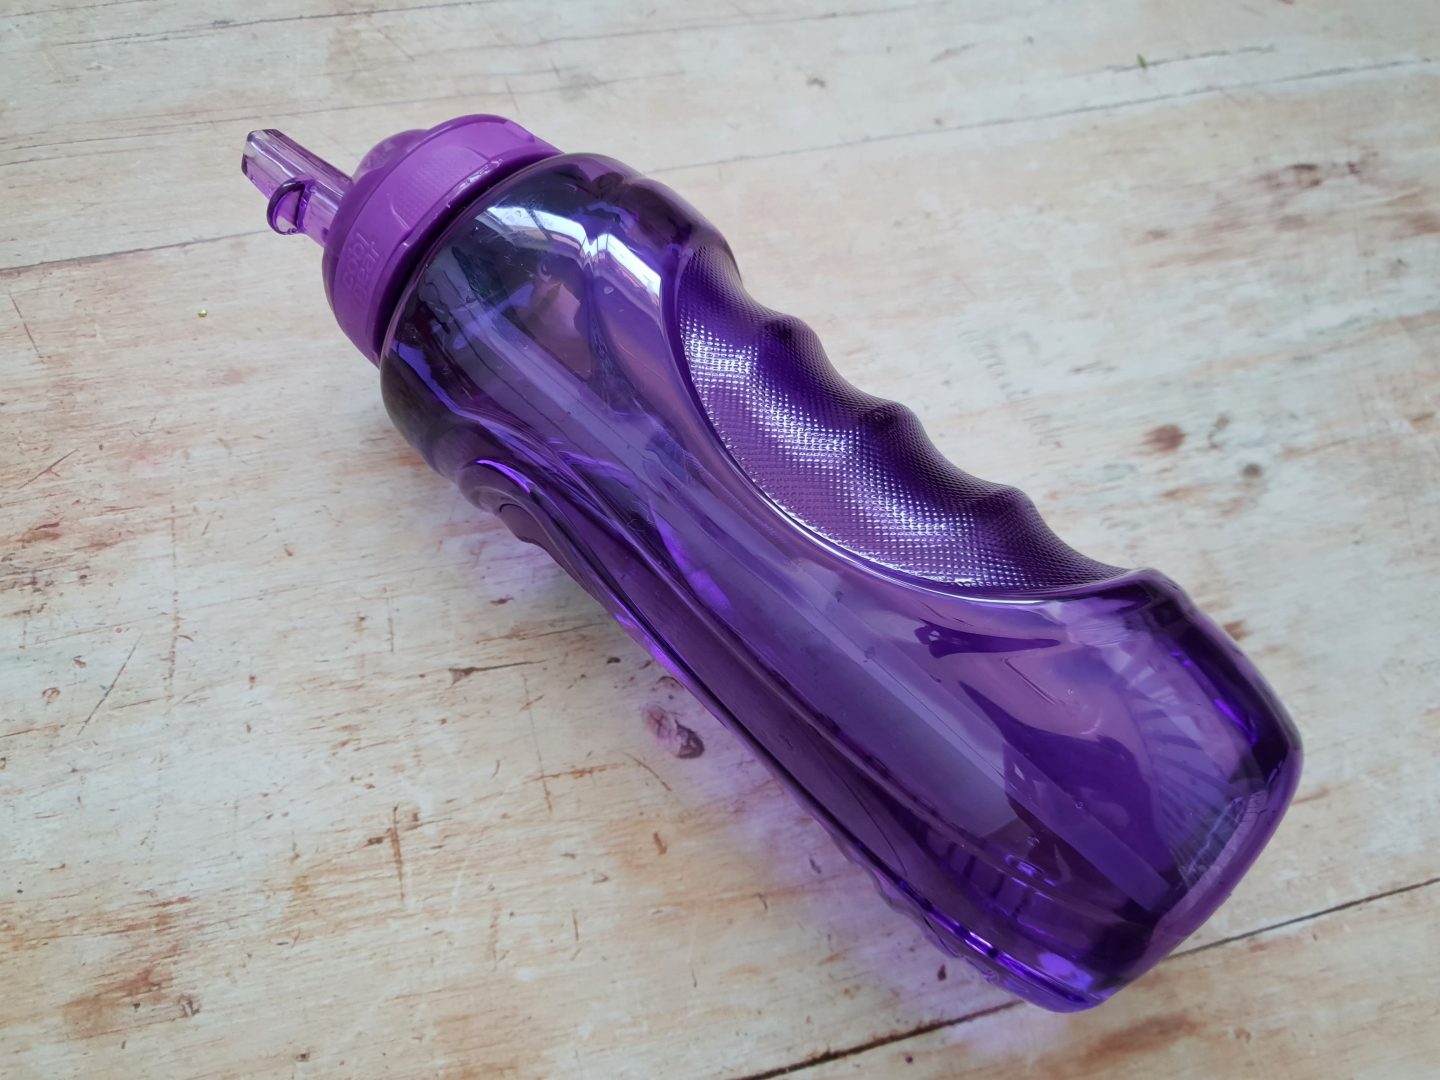 Cool gear bottle with freezer stick